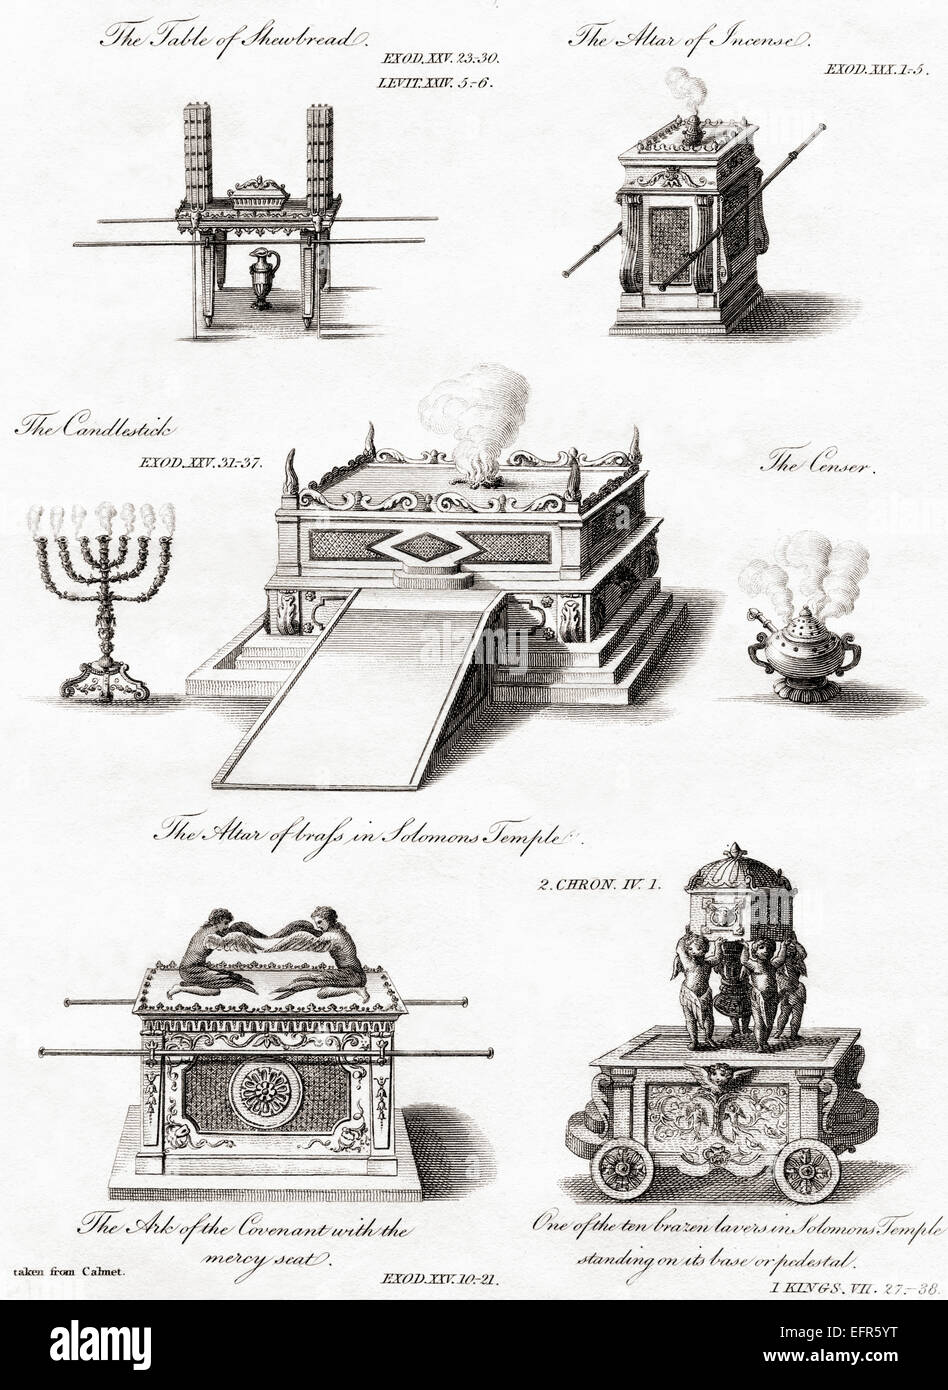 Old Testament religious artifacts. From top left: The Table of Shewbread or Showbread, The Altar of Incense, The Candlestick, The Altar of Brass in Solomon's Temple, The Censer, The Ark of the Covenant with the Mercy Seat and One of the Ten Brazen Lavers in Solomon's Temple. Stock Photo